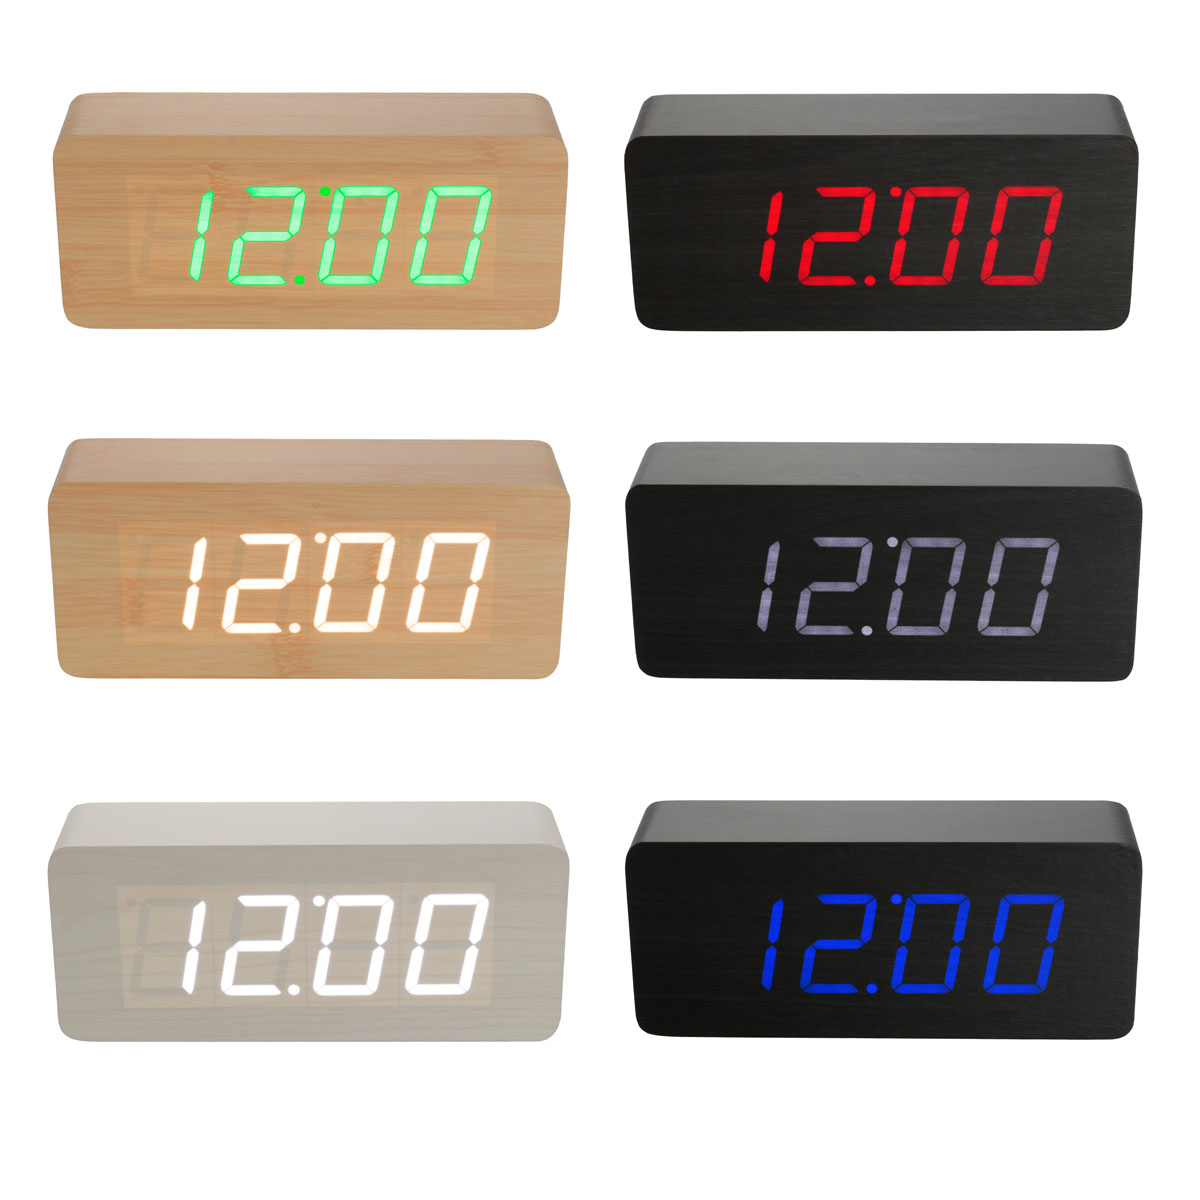 Multifunctional-Wooden-Digital-Clock-Two-Modes-Default-Display-Time-Built-in-Battery-Voice-Control-S-1891907-1